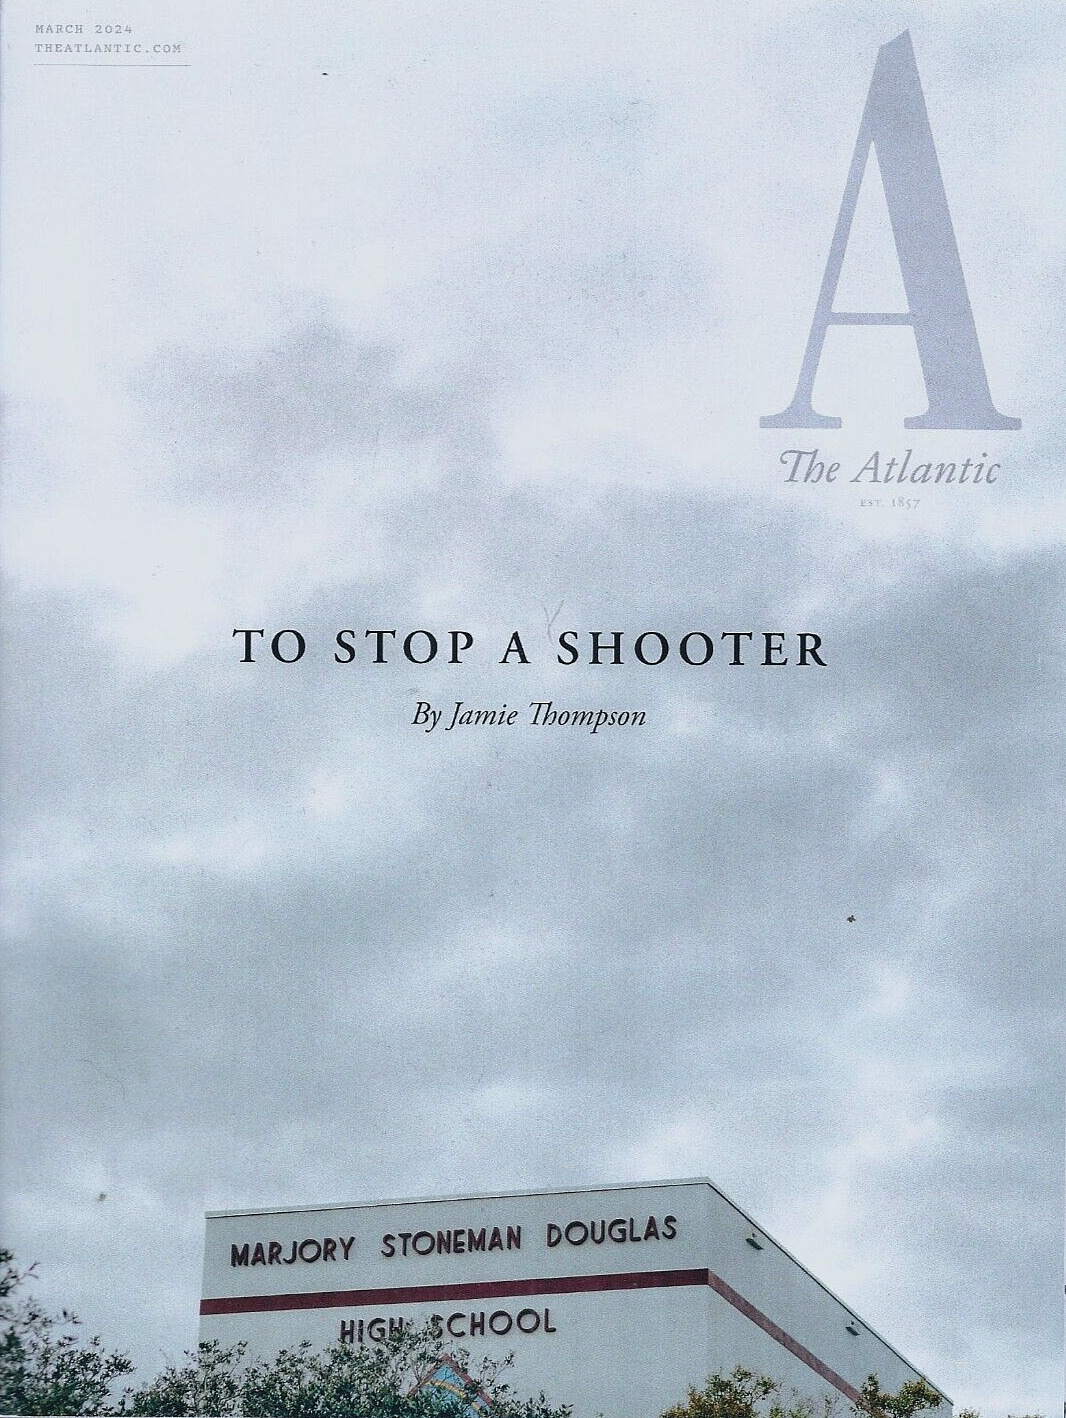 The Atlantic Monthly Magazine March 2024 To Stop a Shooter James Bond and More